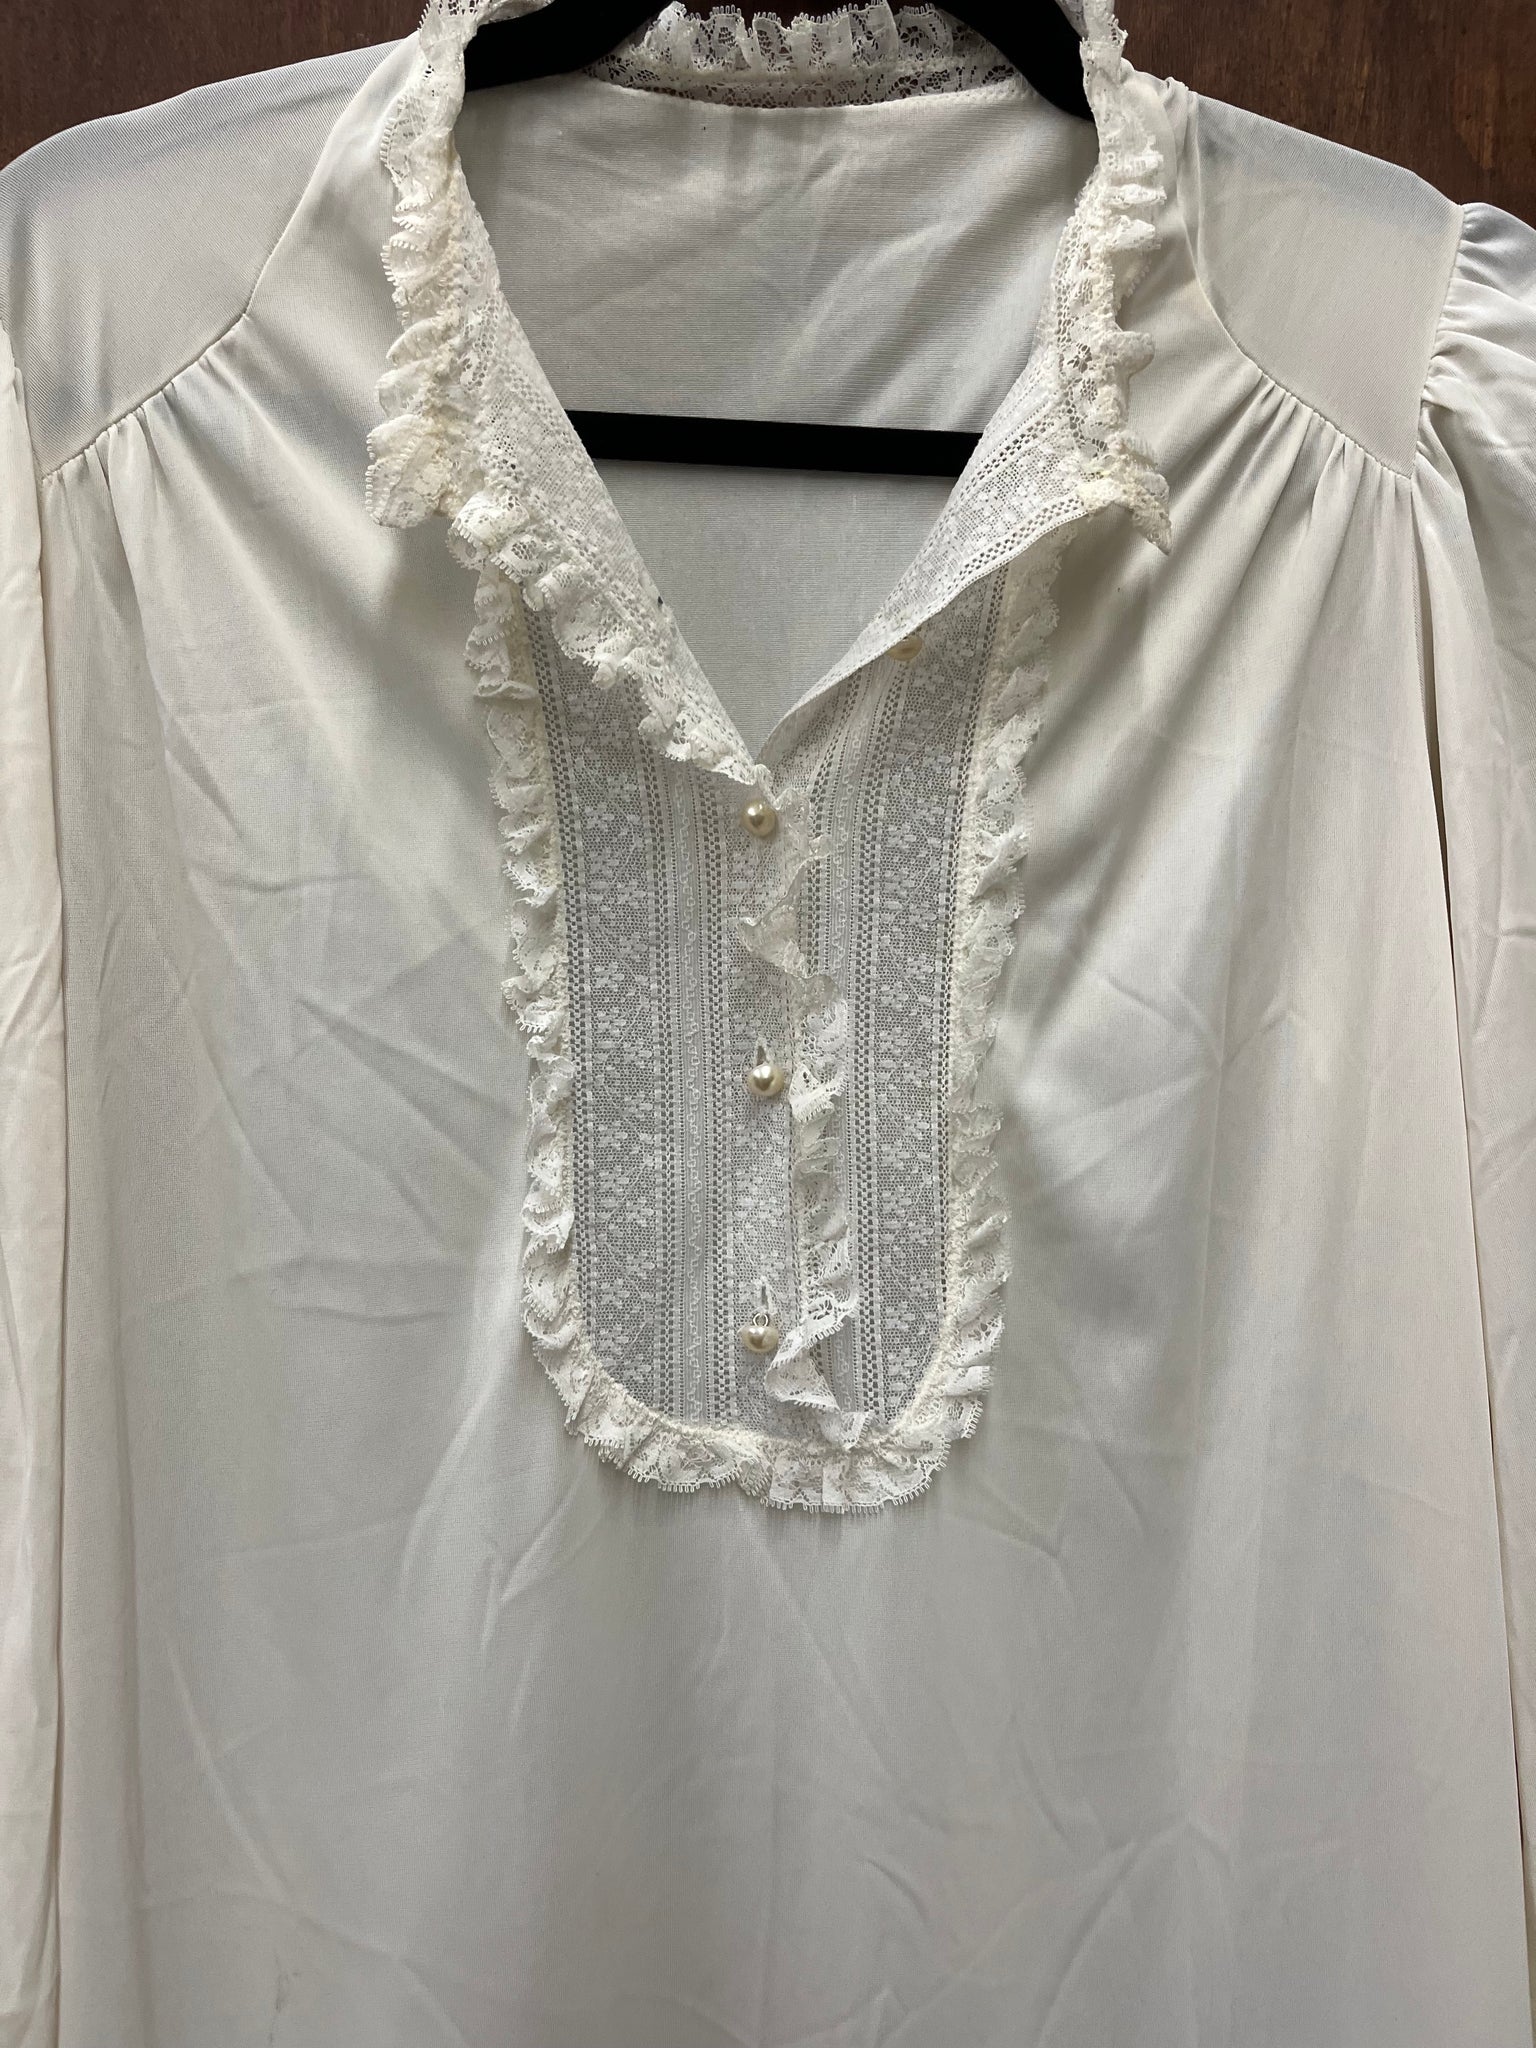 1960S LINGERIE-white nightgown lace trim